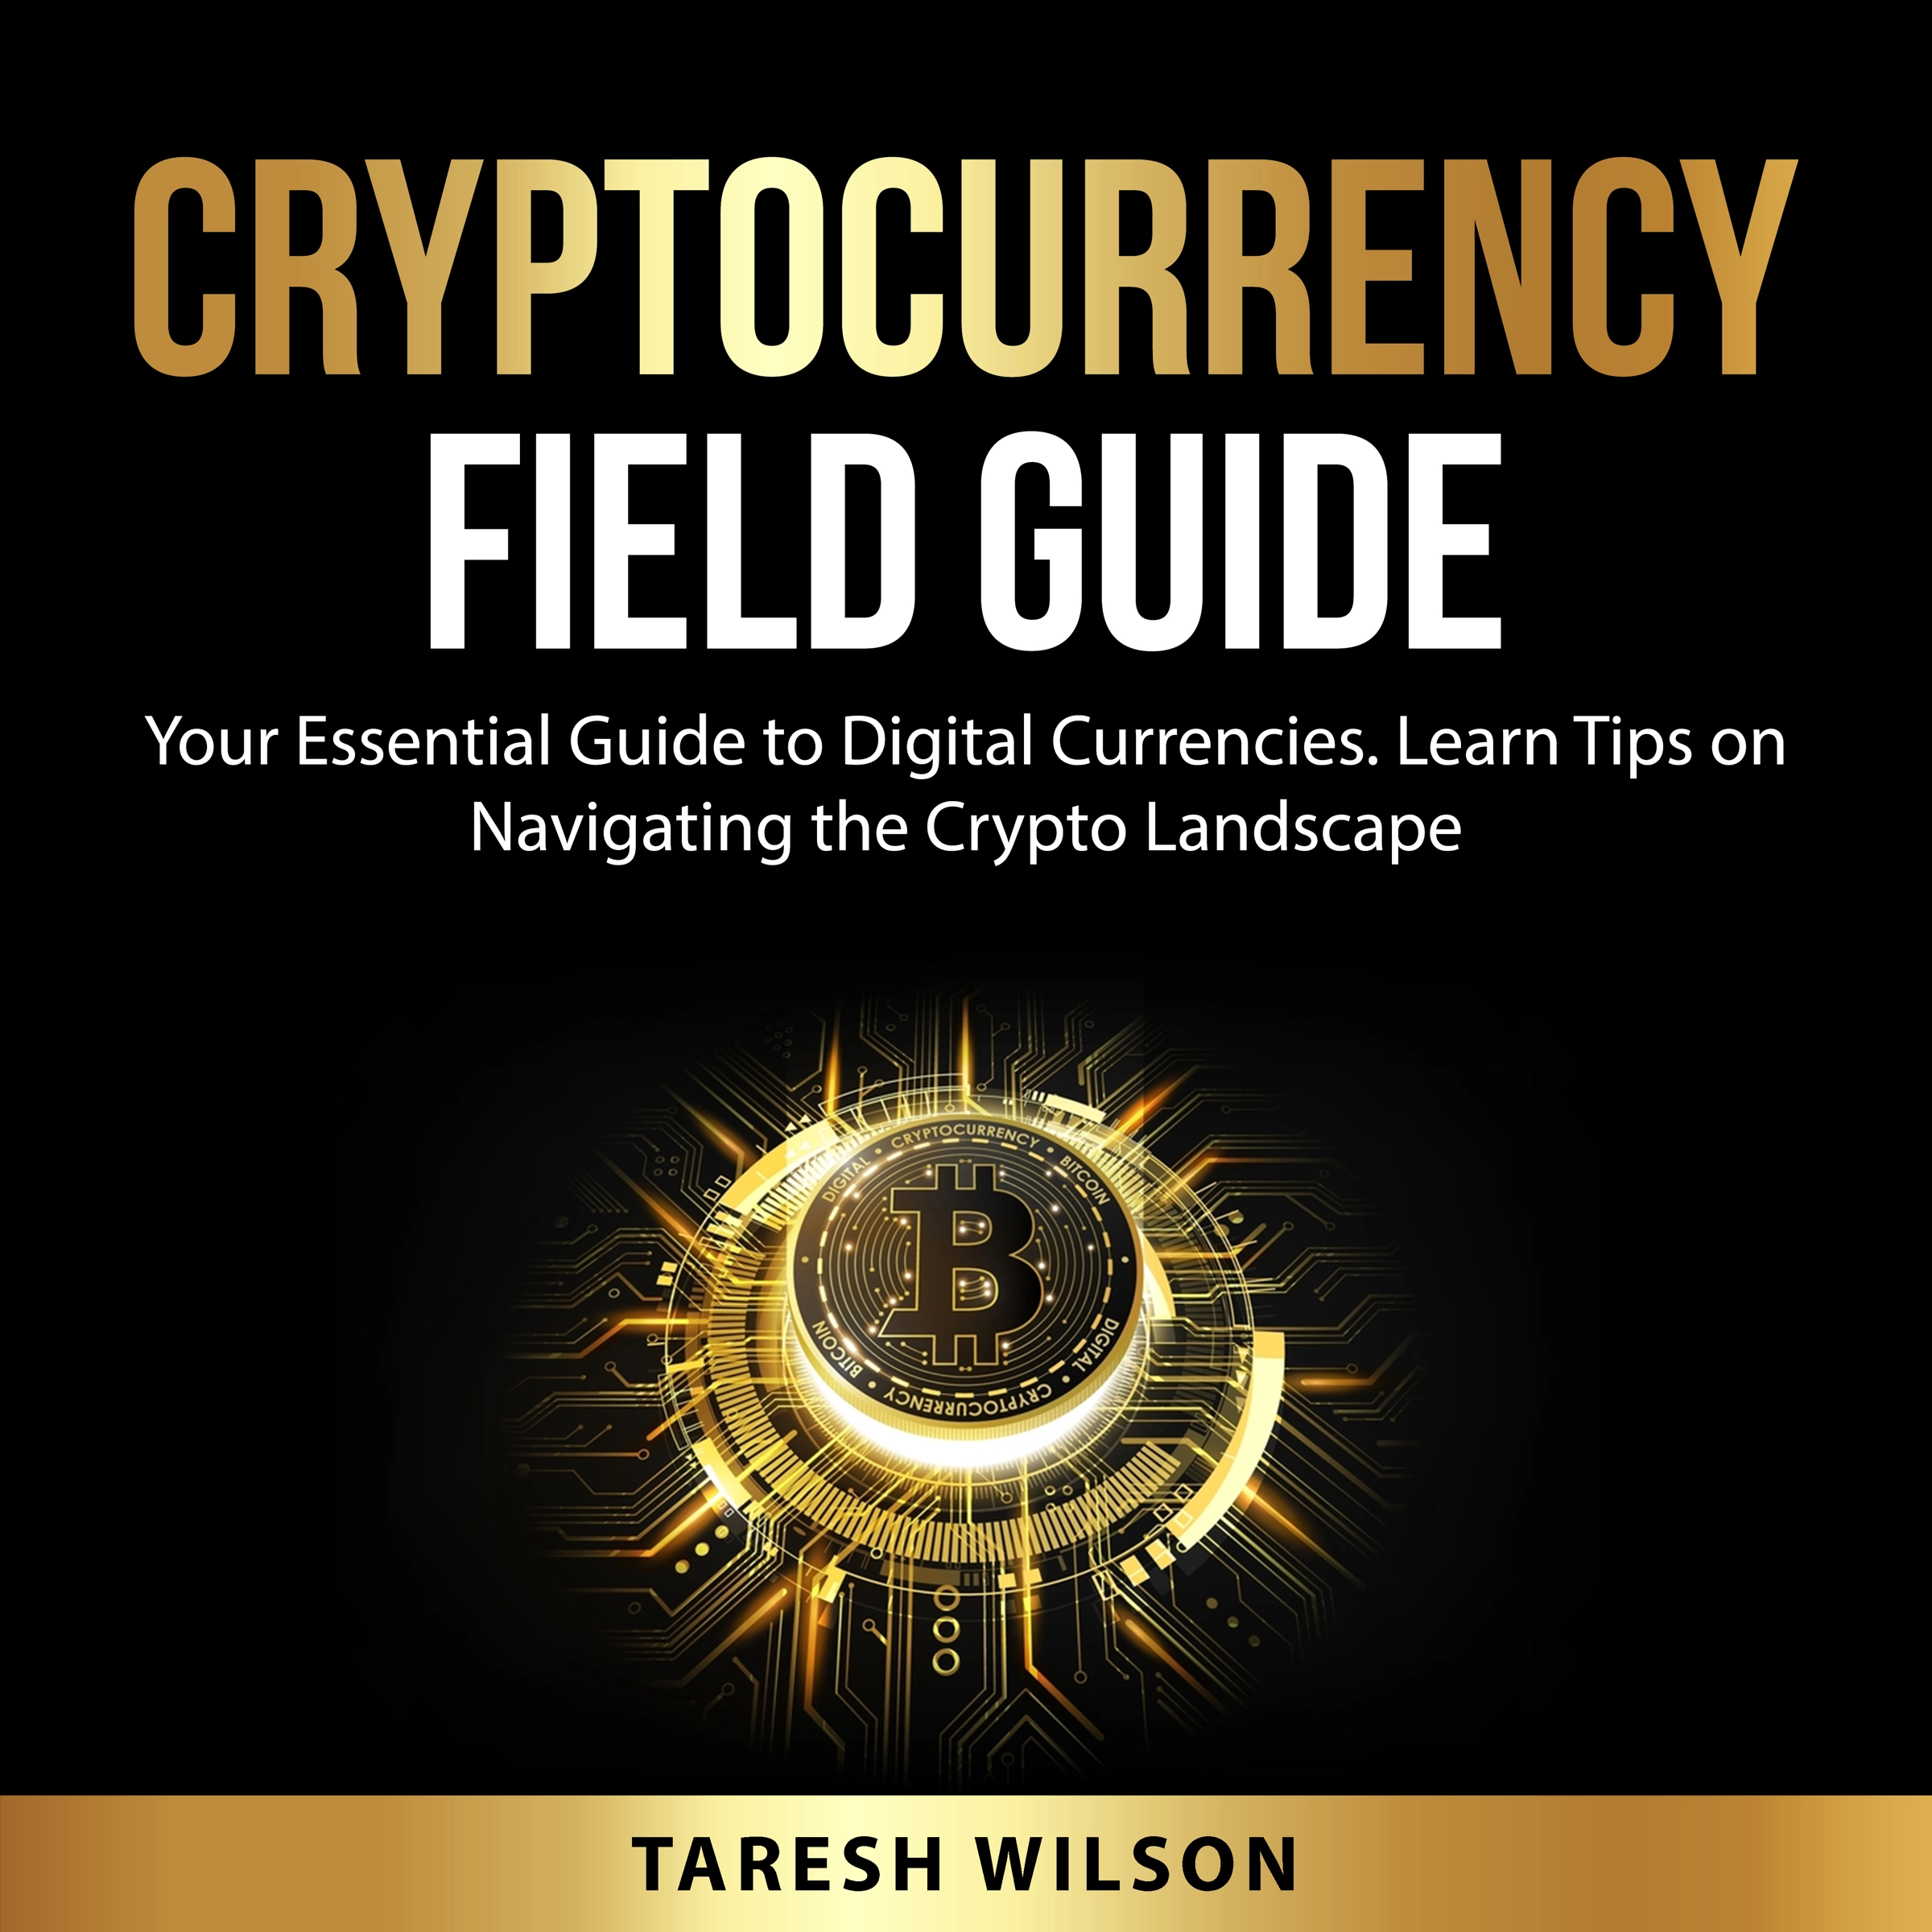 Cryptocurrency Field Guide by Taresh Wilson Audiobook